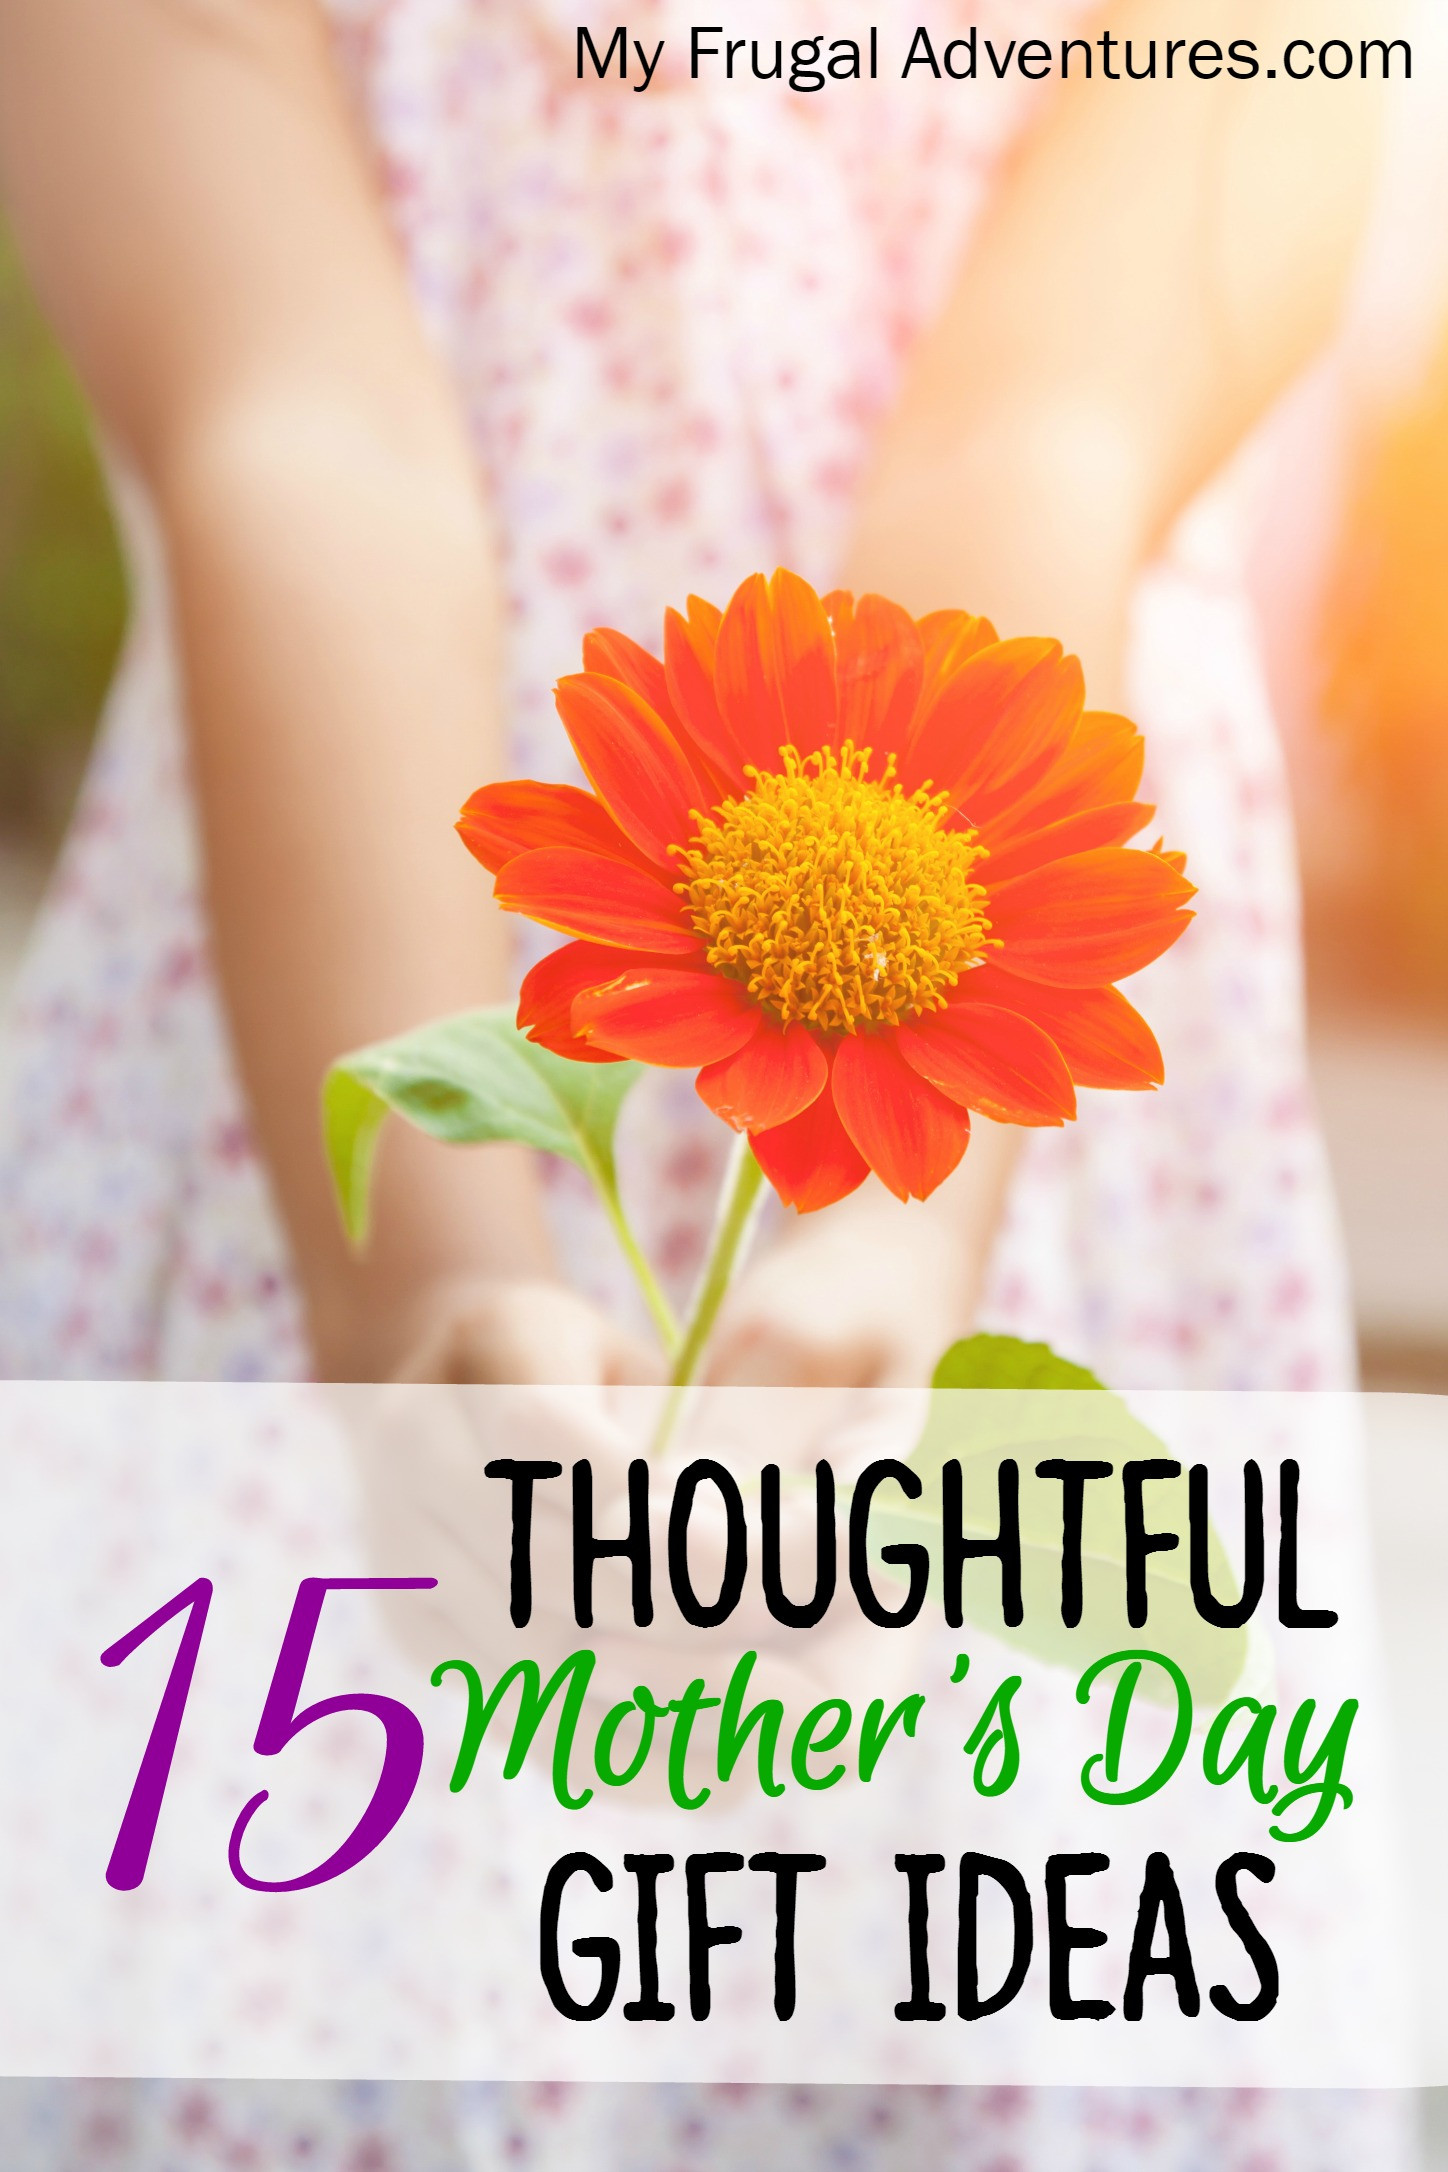 Mother'S Day Gift Ideas For My Daughter
 15 Thoughtful Mother s Day Gift Ideas My Frugal Adventures